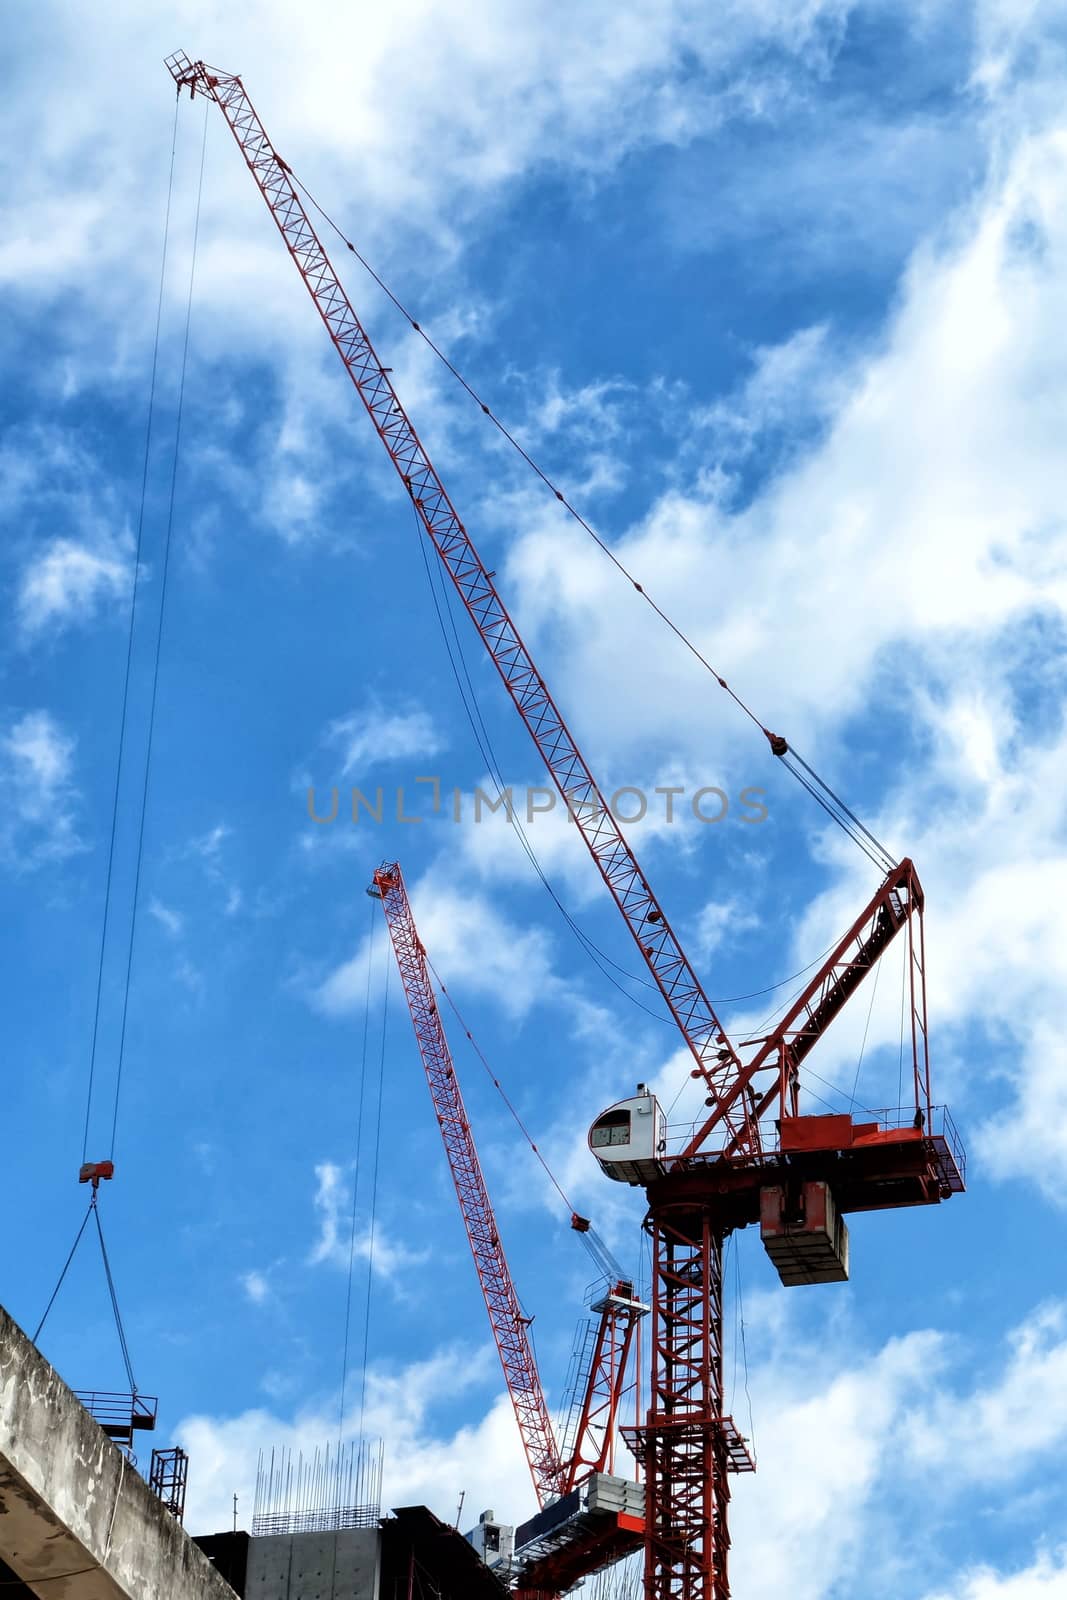 Crane (machine) with Sky and Cloud Background.